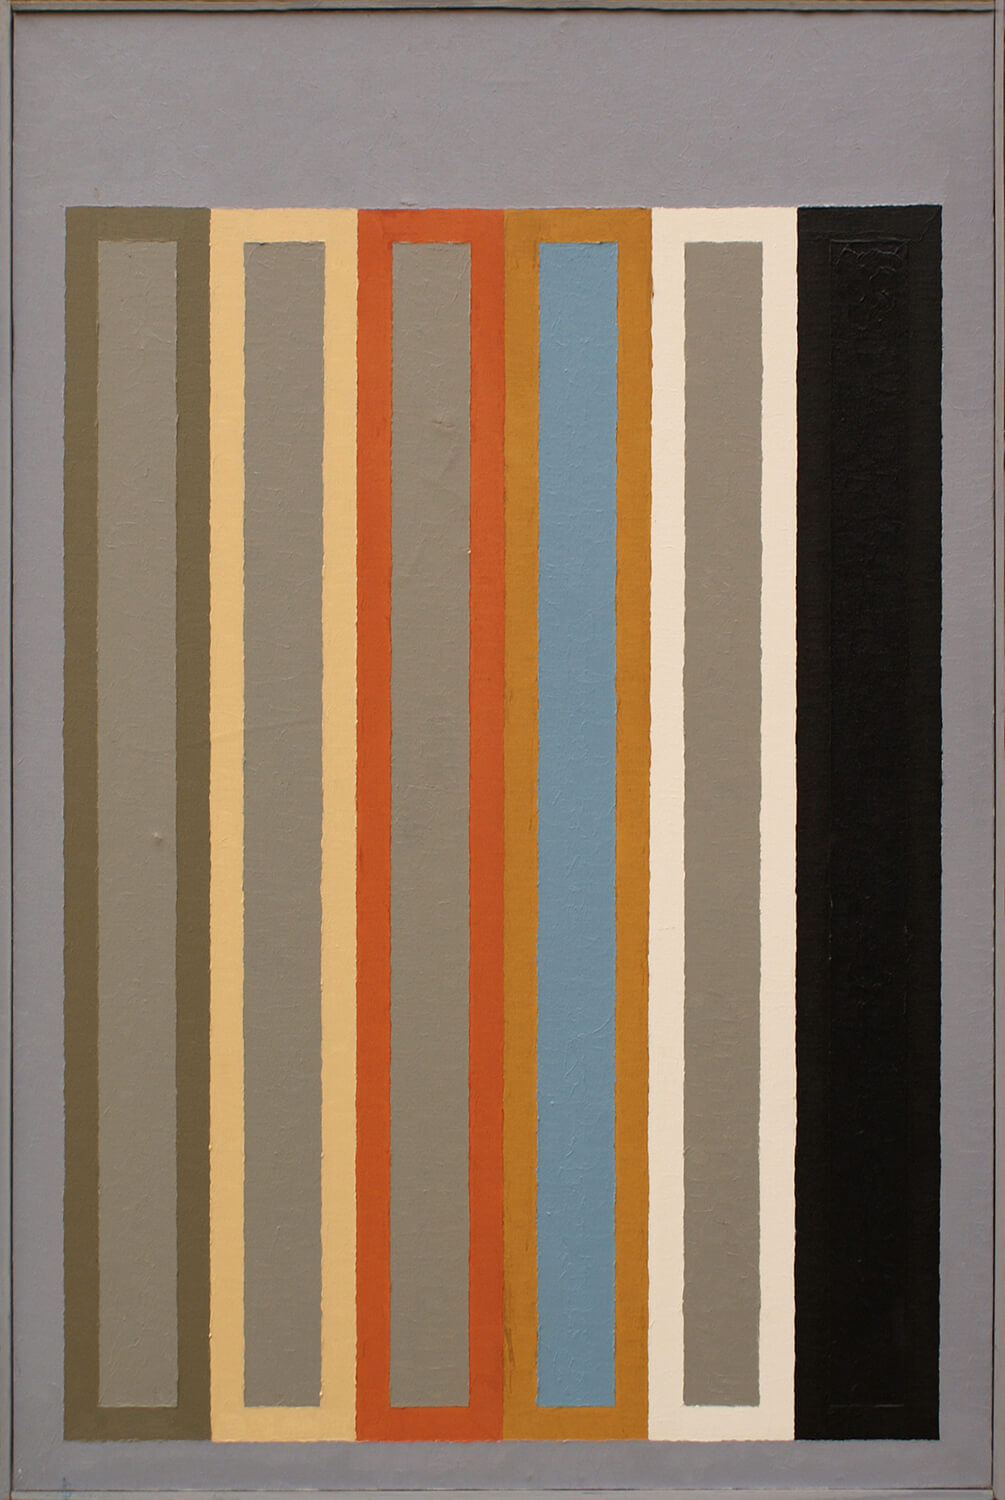 Peter Benkert, Untitled 2 (five-part series), 1977, acrylic on canvas, 90 x 60 cm